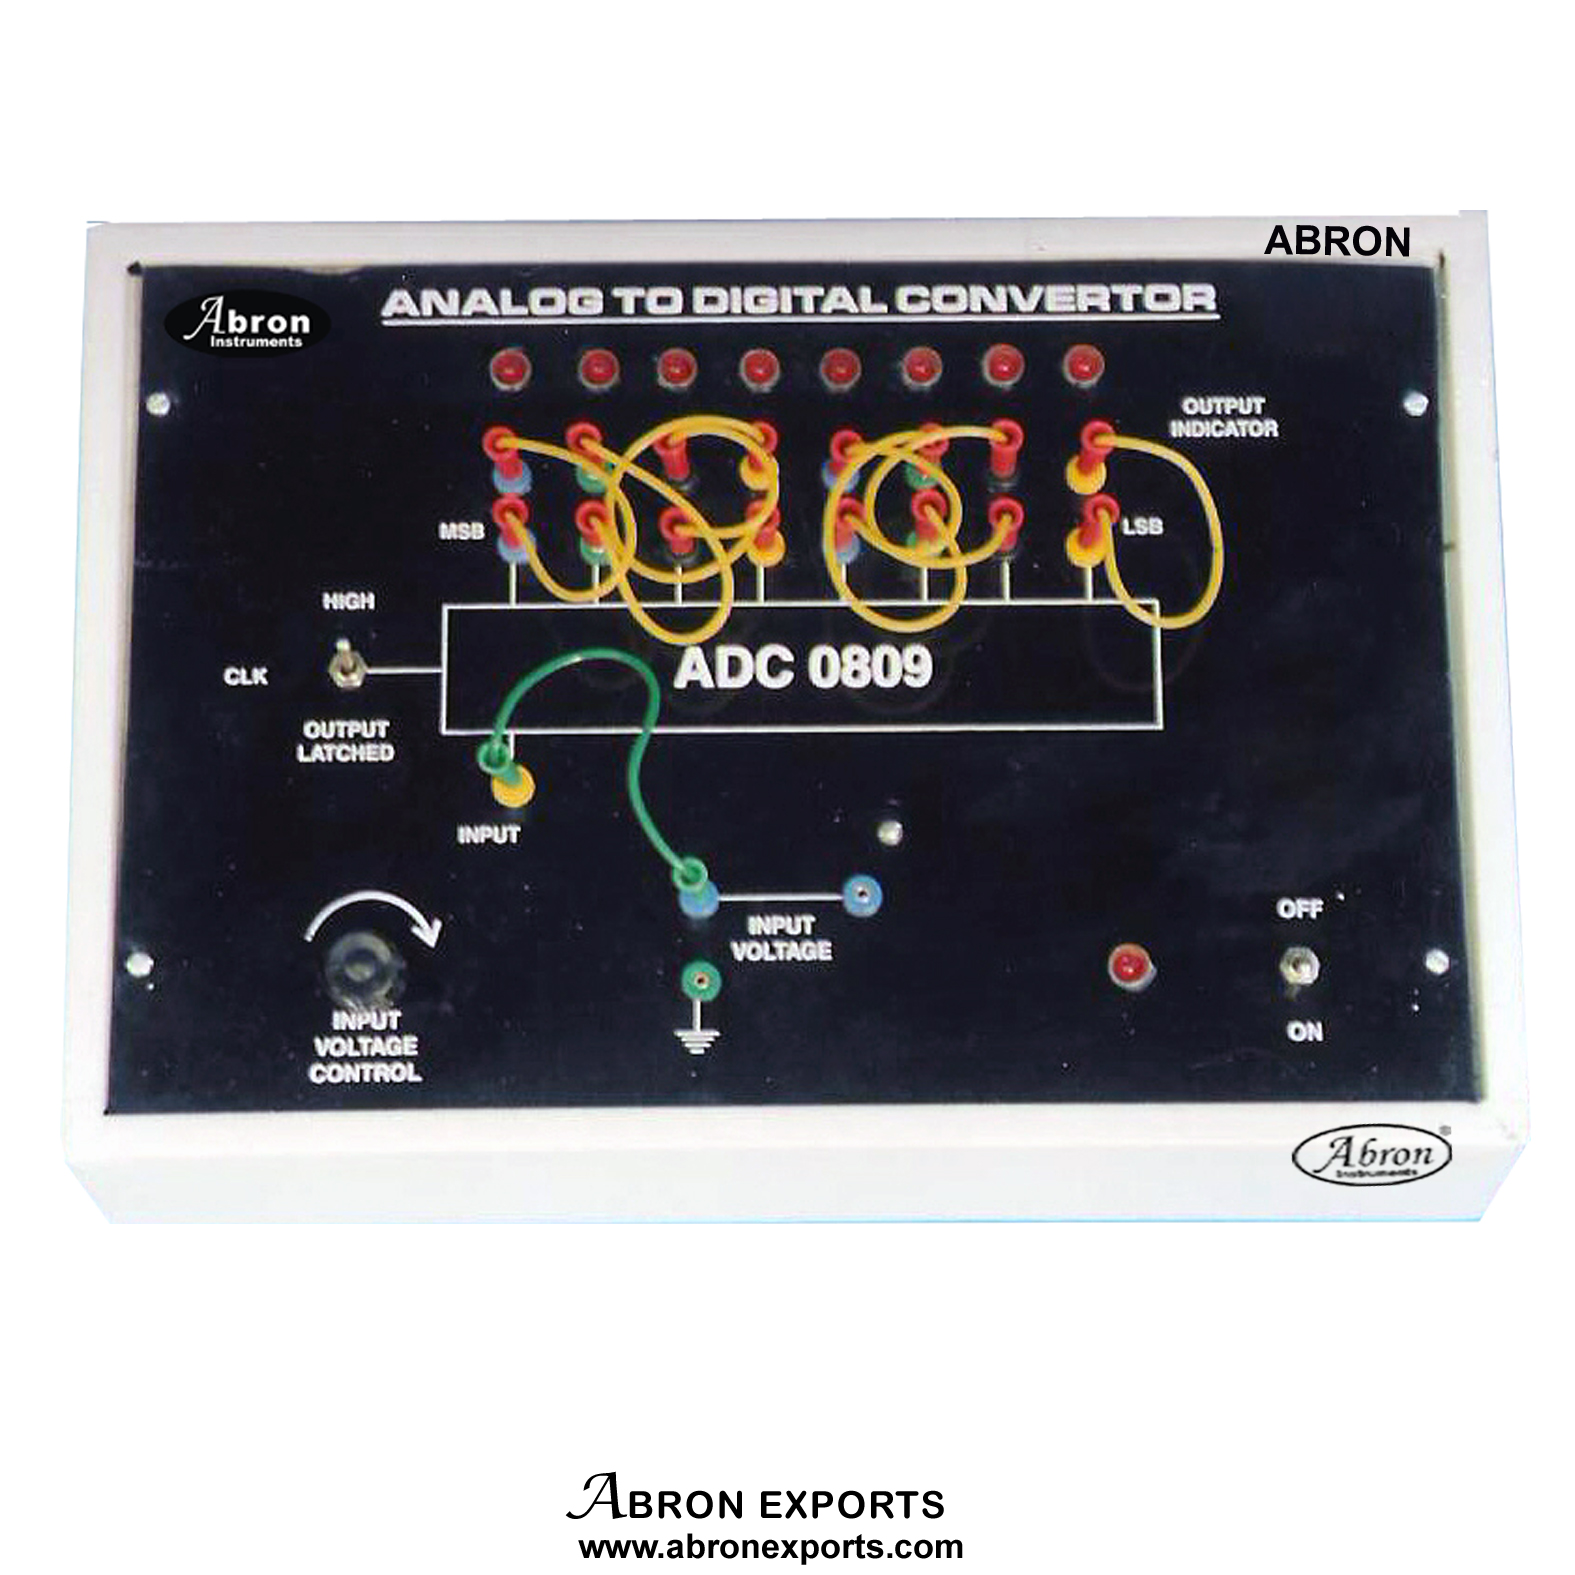 Analog to Digital Convertor A to D with power supply in box with patch cord truth table abron AE-1202A